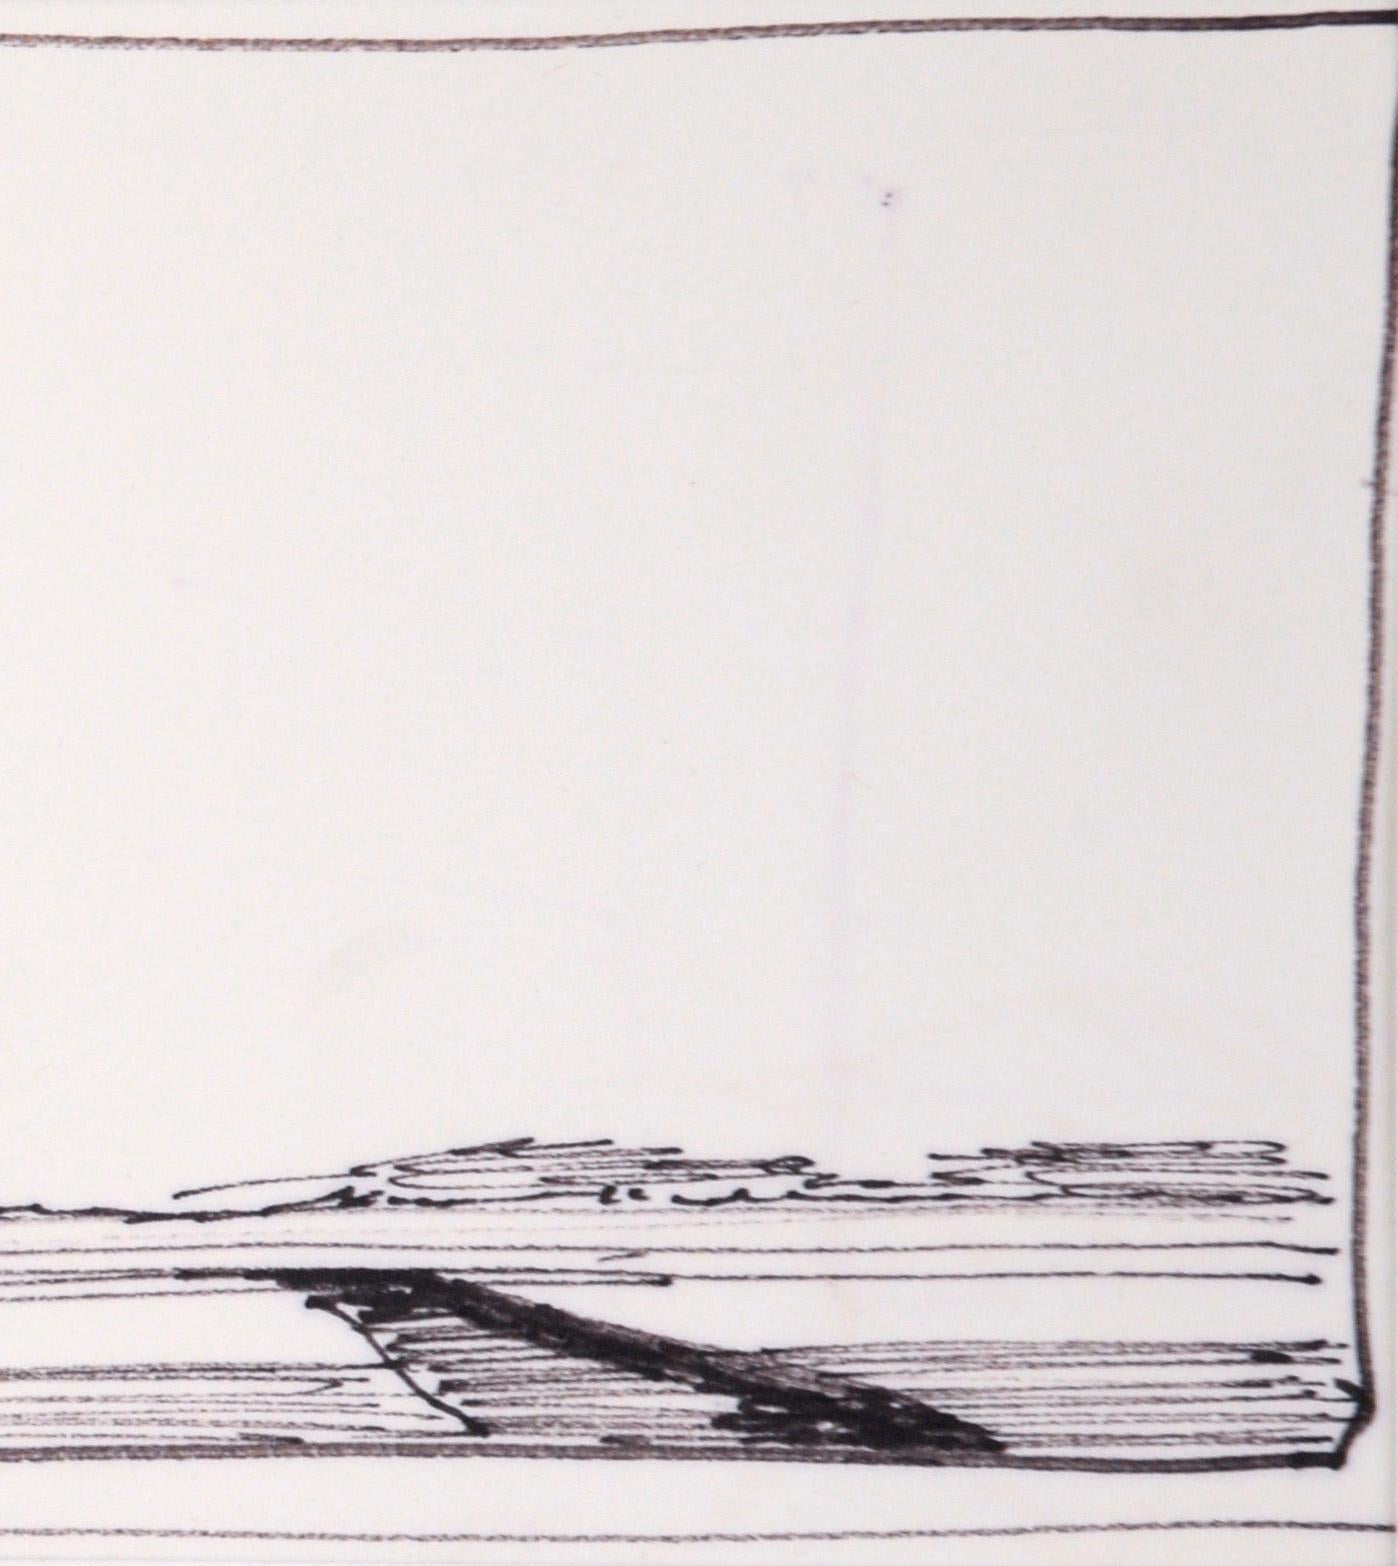 A Cloudless Sky - Line Drawing Landscape in Ink on Paper - Art by Laurence Sisson